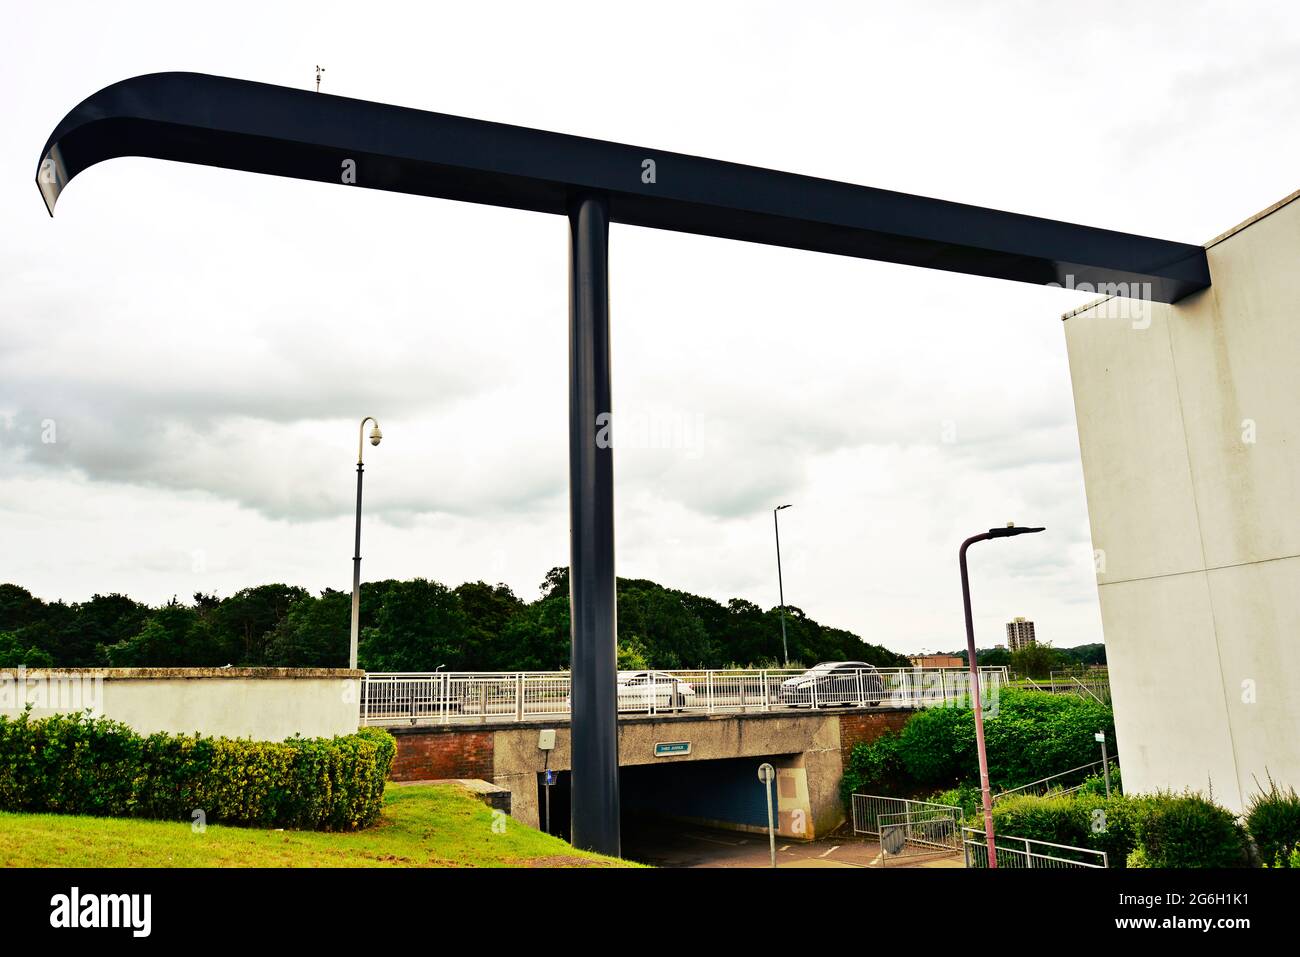 Giant metal structure in Harlow Stock Photo